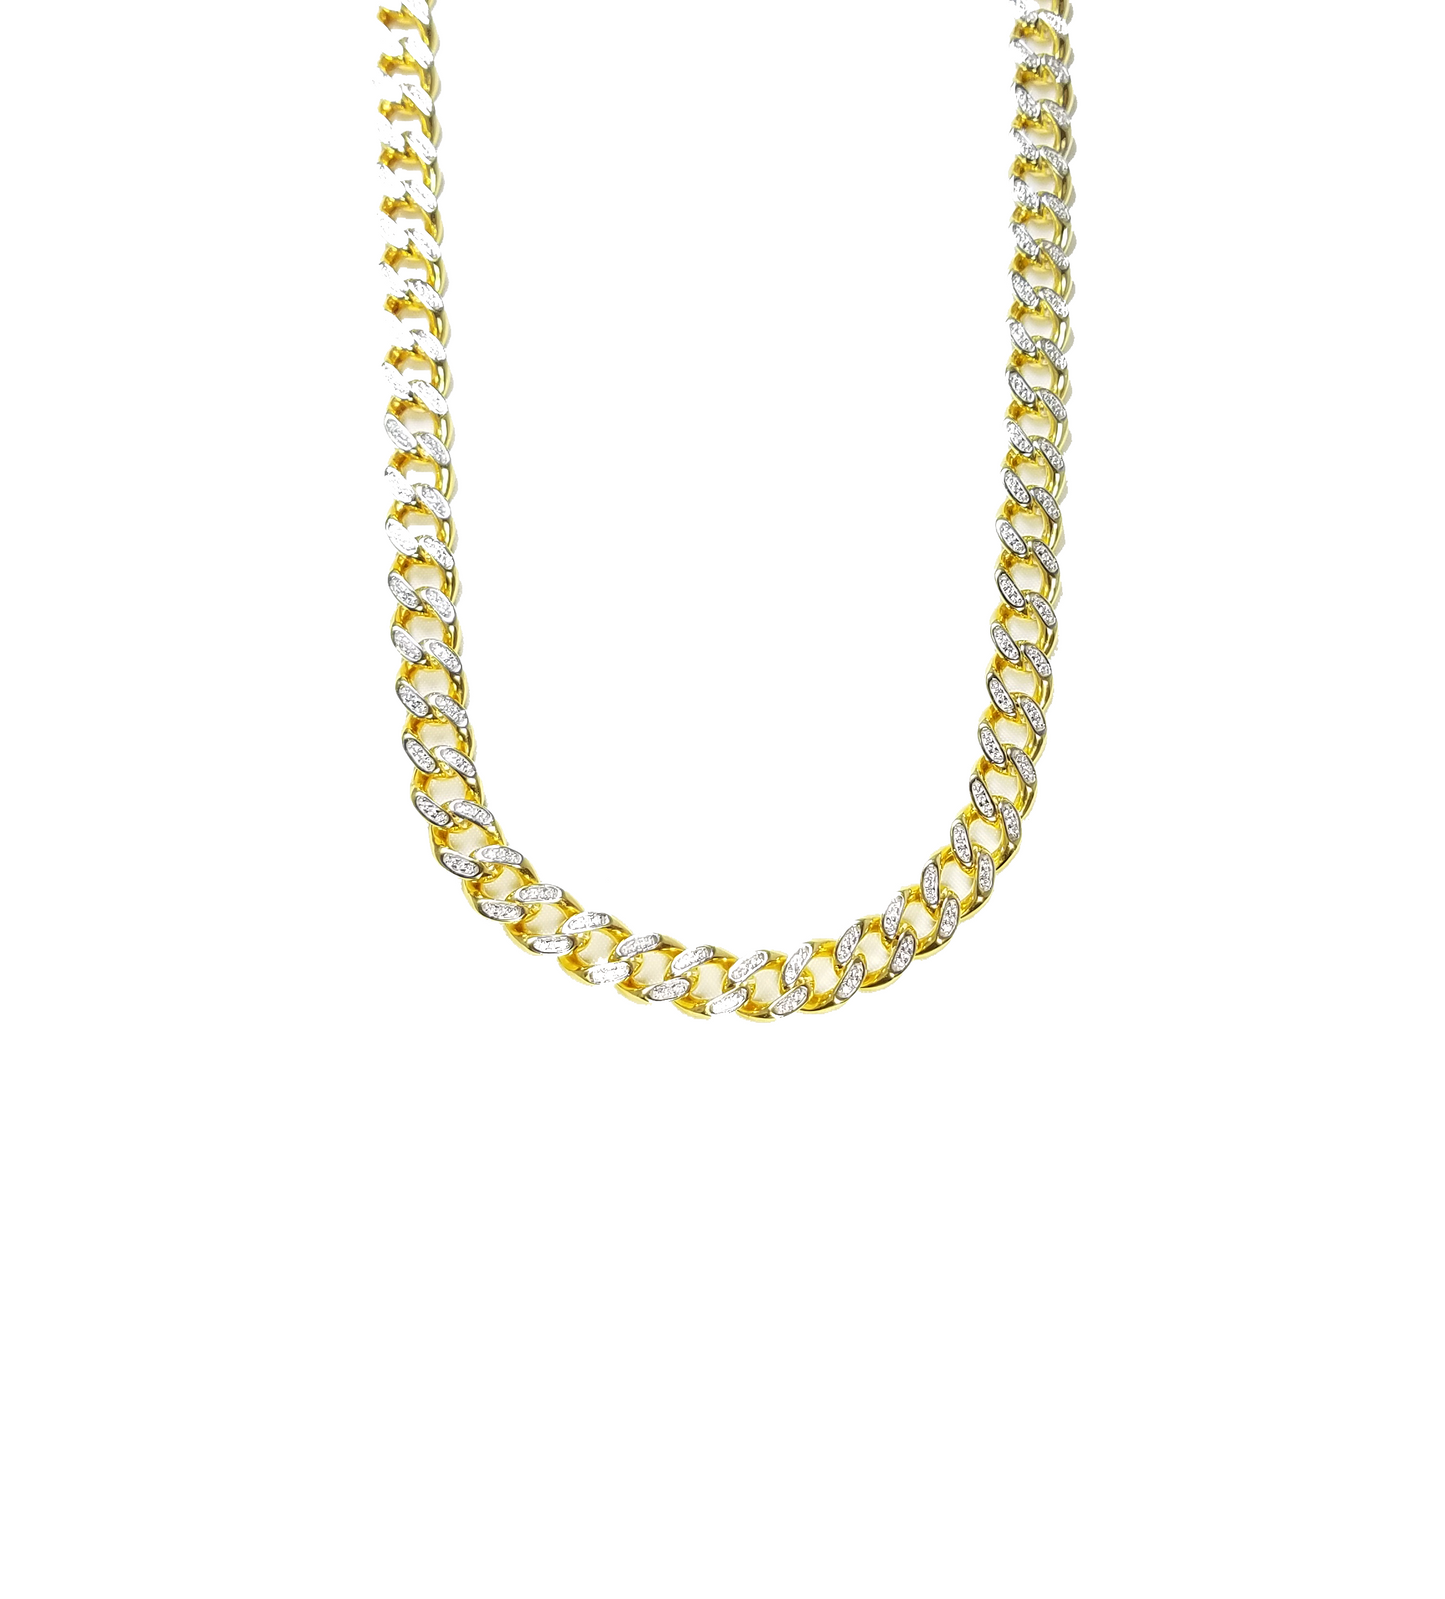 NG564 26" 14K Gold Plated Iced Chain